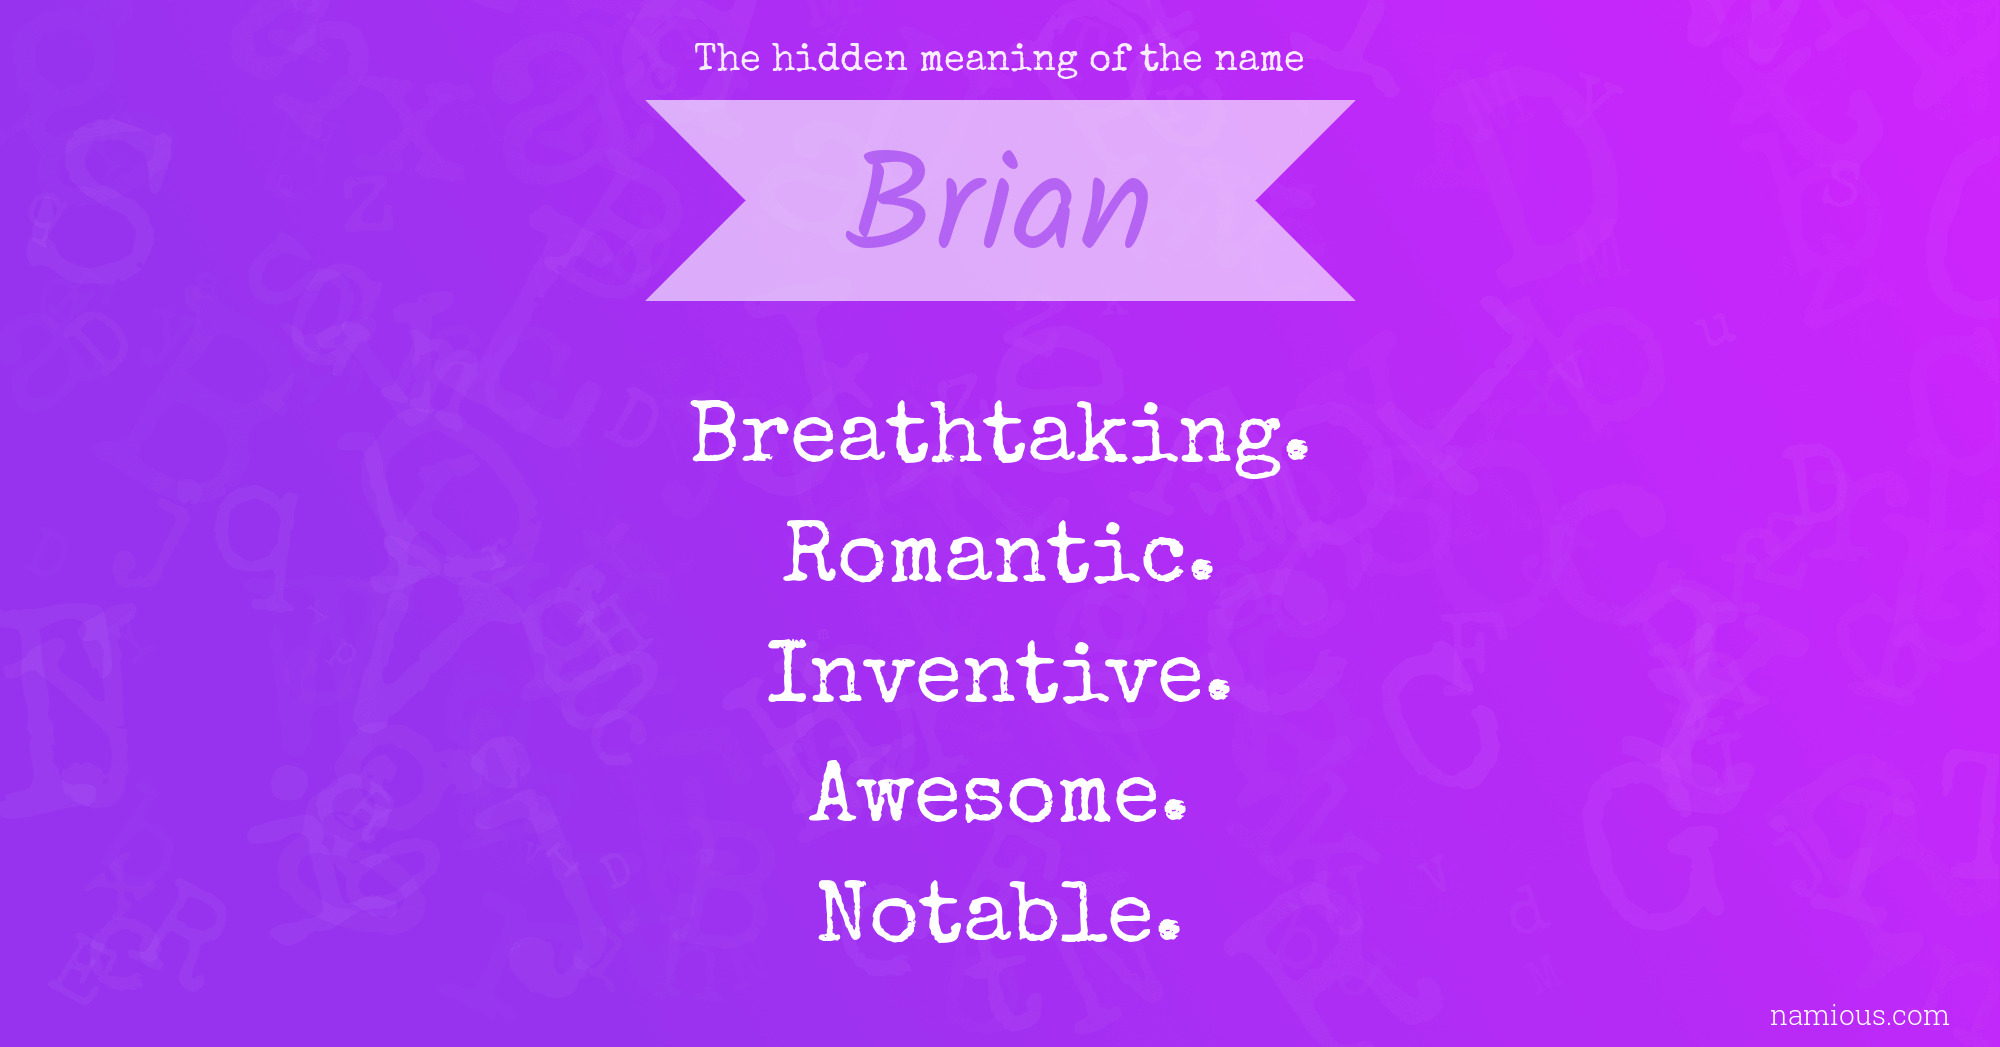 The hidden meaning of the name Brian